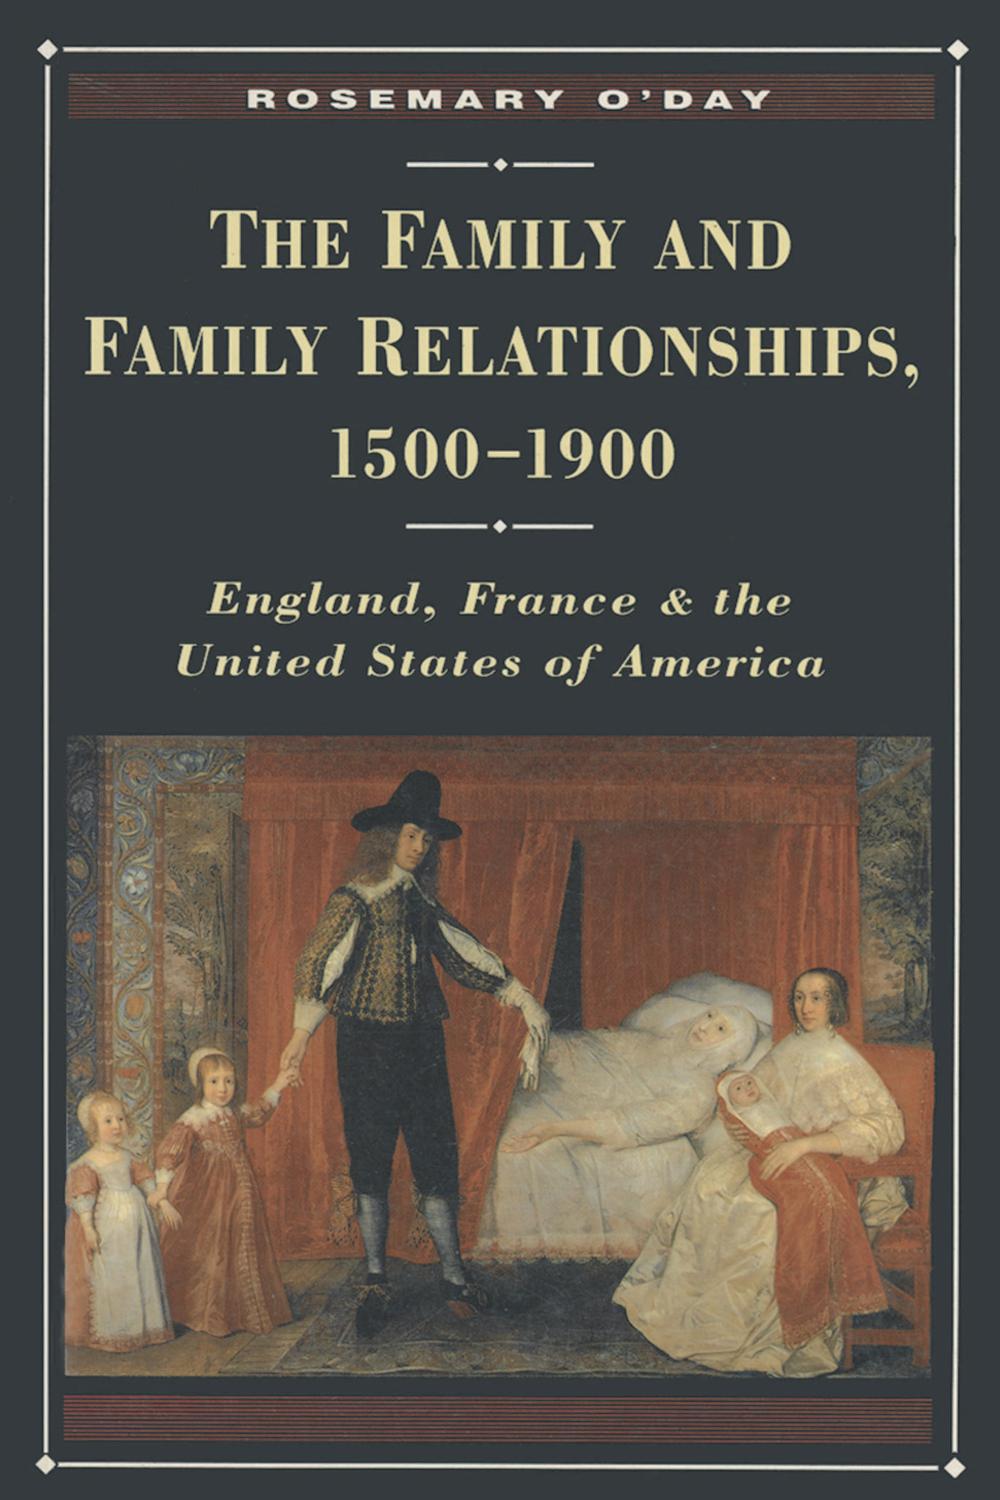 The Family and Family Relationships, 1500-1900 - Rosemary O'Day